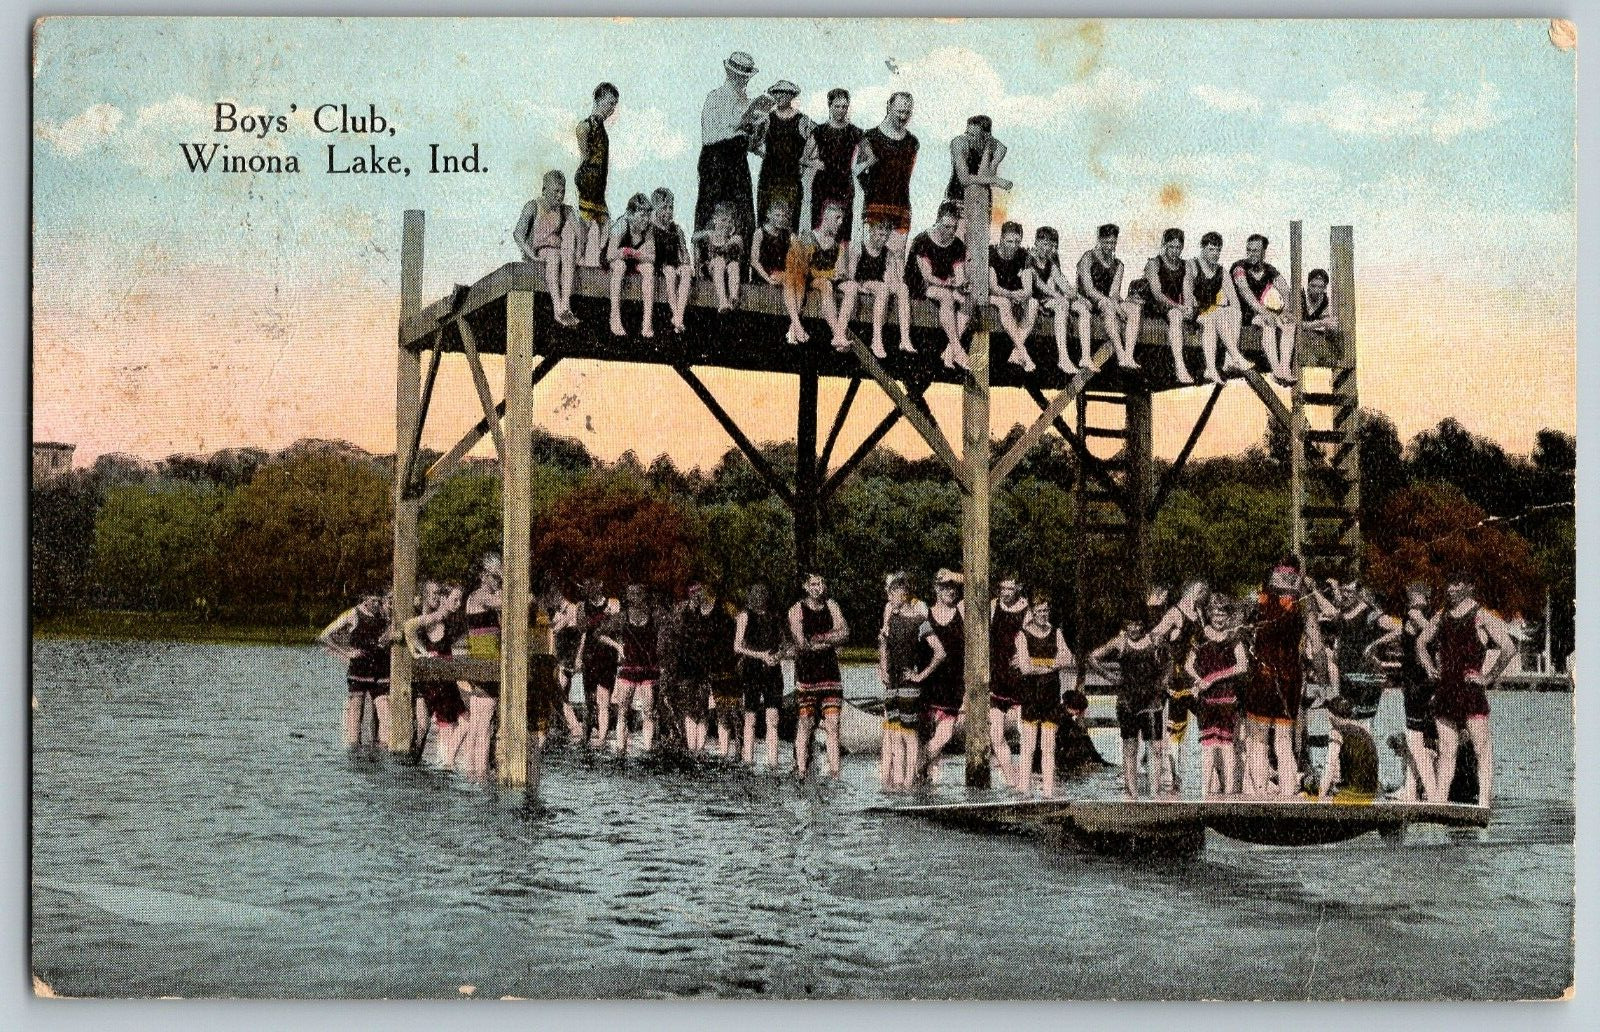 Winona Lake, Indiana IN - Boy's Club - Vintage Postcard - Posted